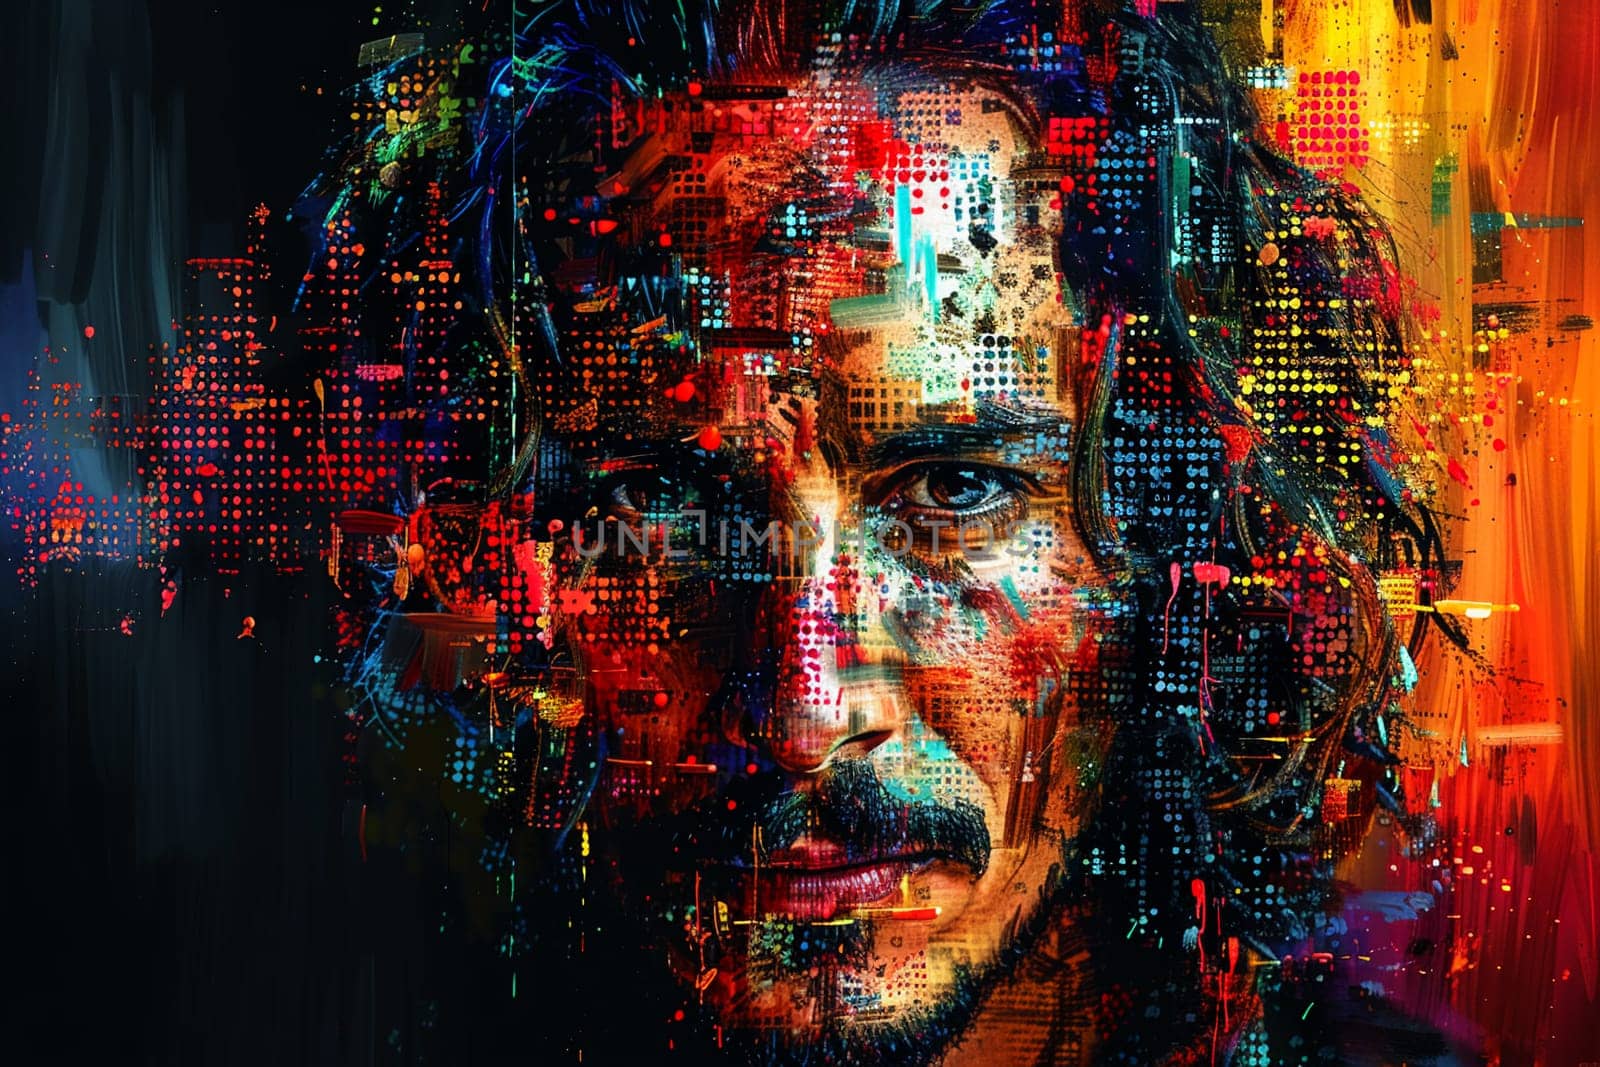 Pixelated Portrait of an Iconic Historical Figure, The face blurs into a grid, creating a homage that bridges digital and traditional.